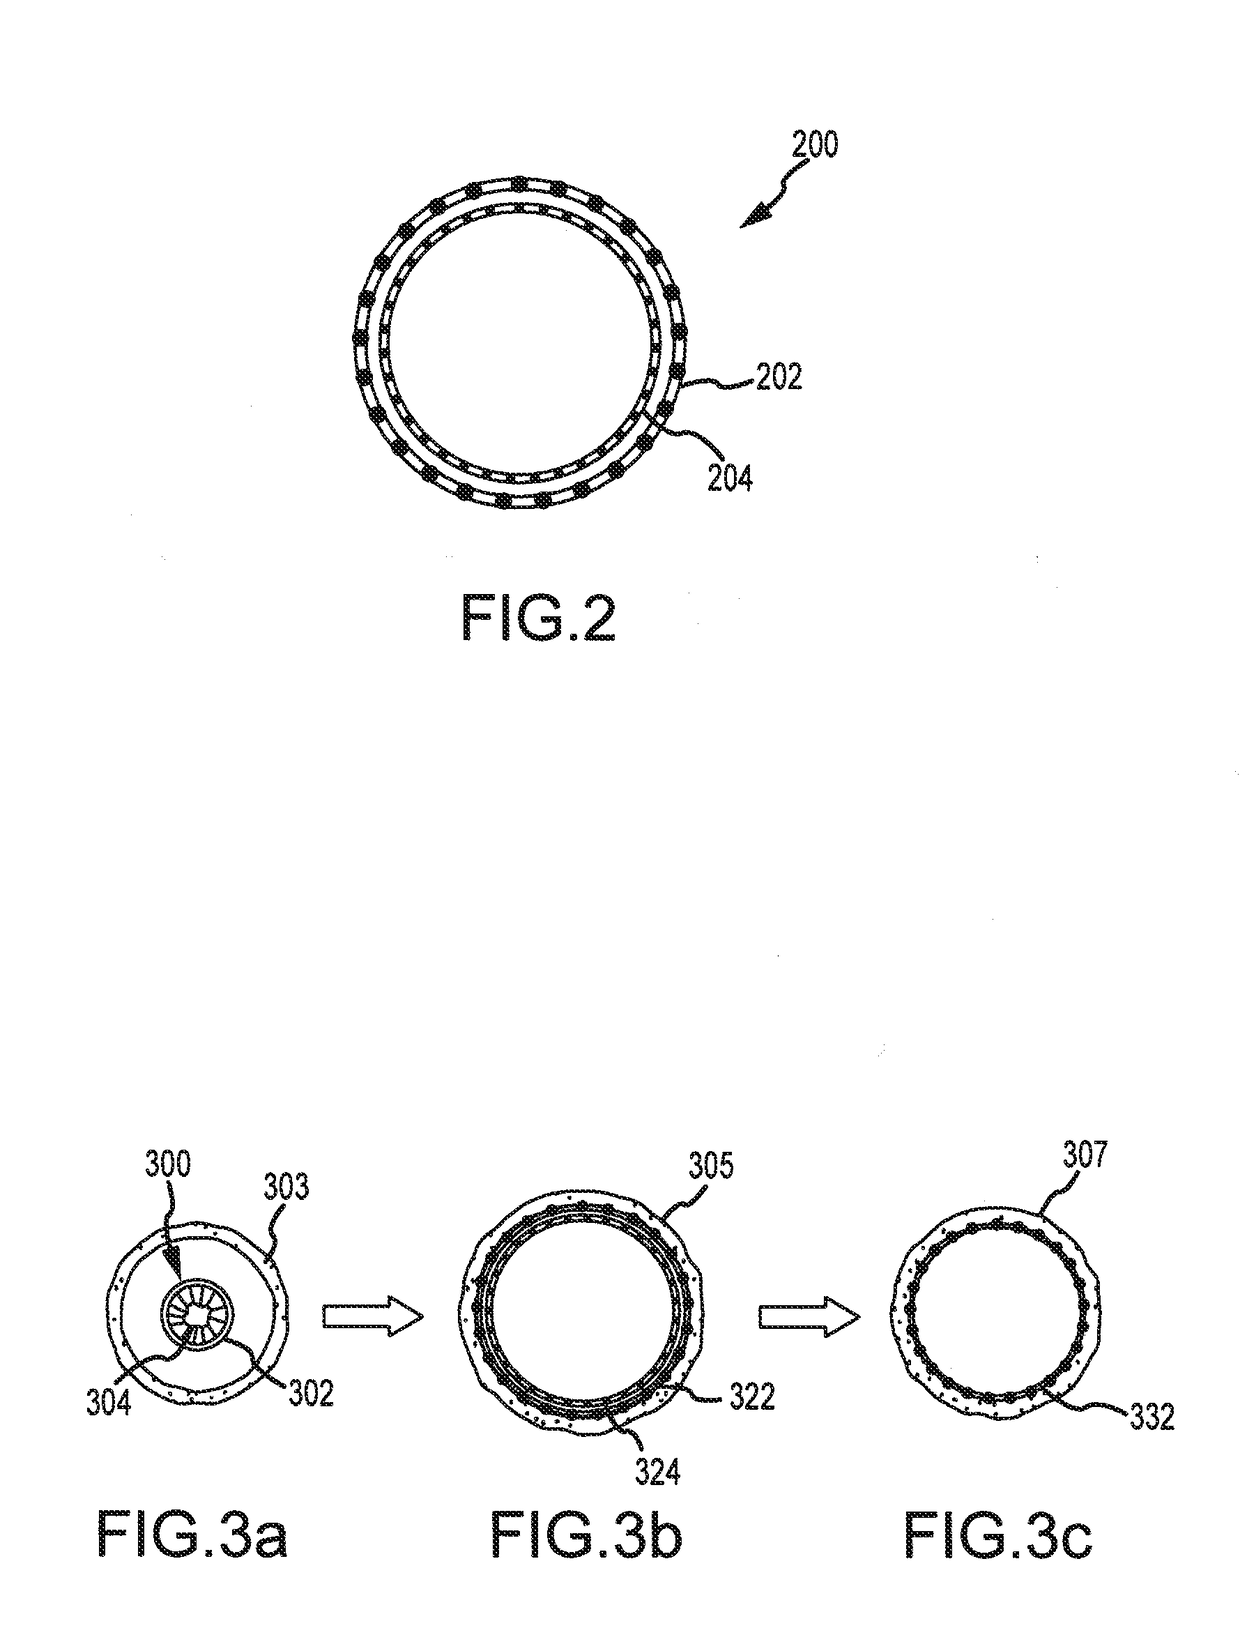 Post-implantation contractible or expandable devices and method of using and making the same